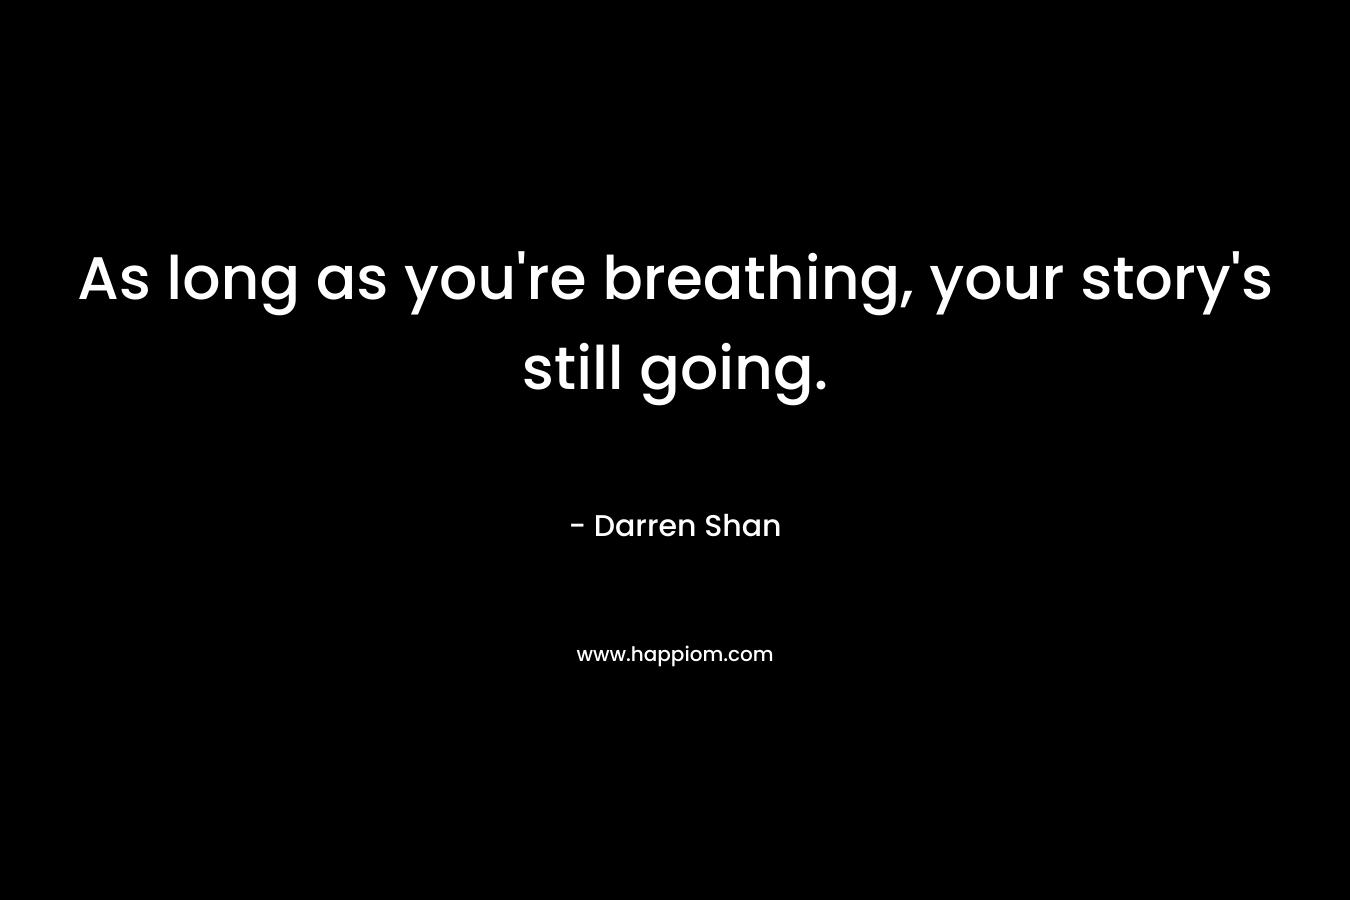 As long as you're breathing, your story's still going.